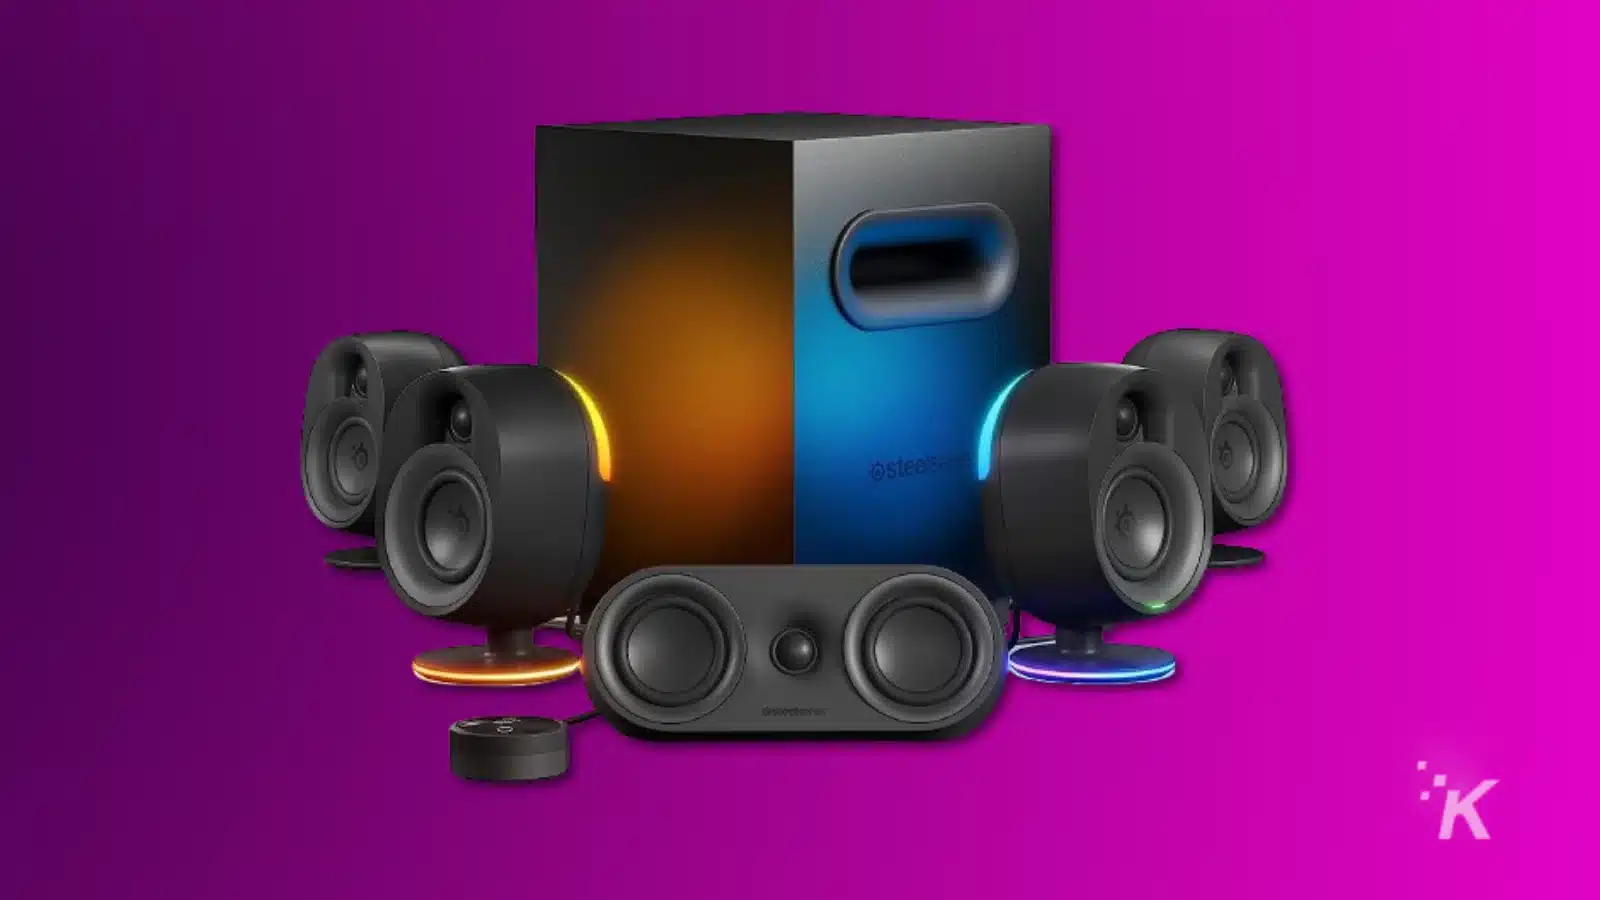 Render of the steelseries arena 9 wireless gaming speakers on a purple background